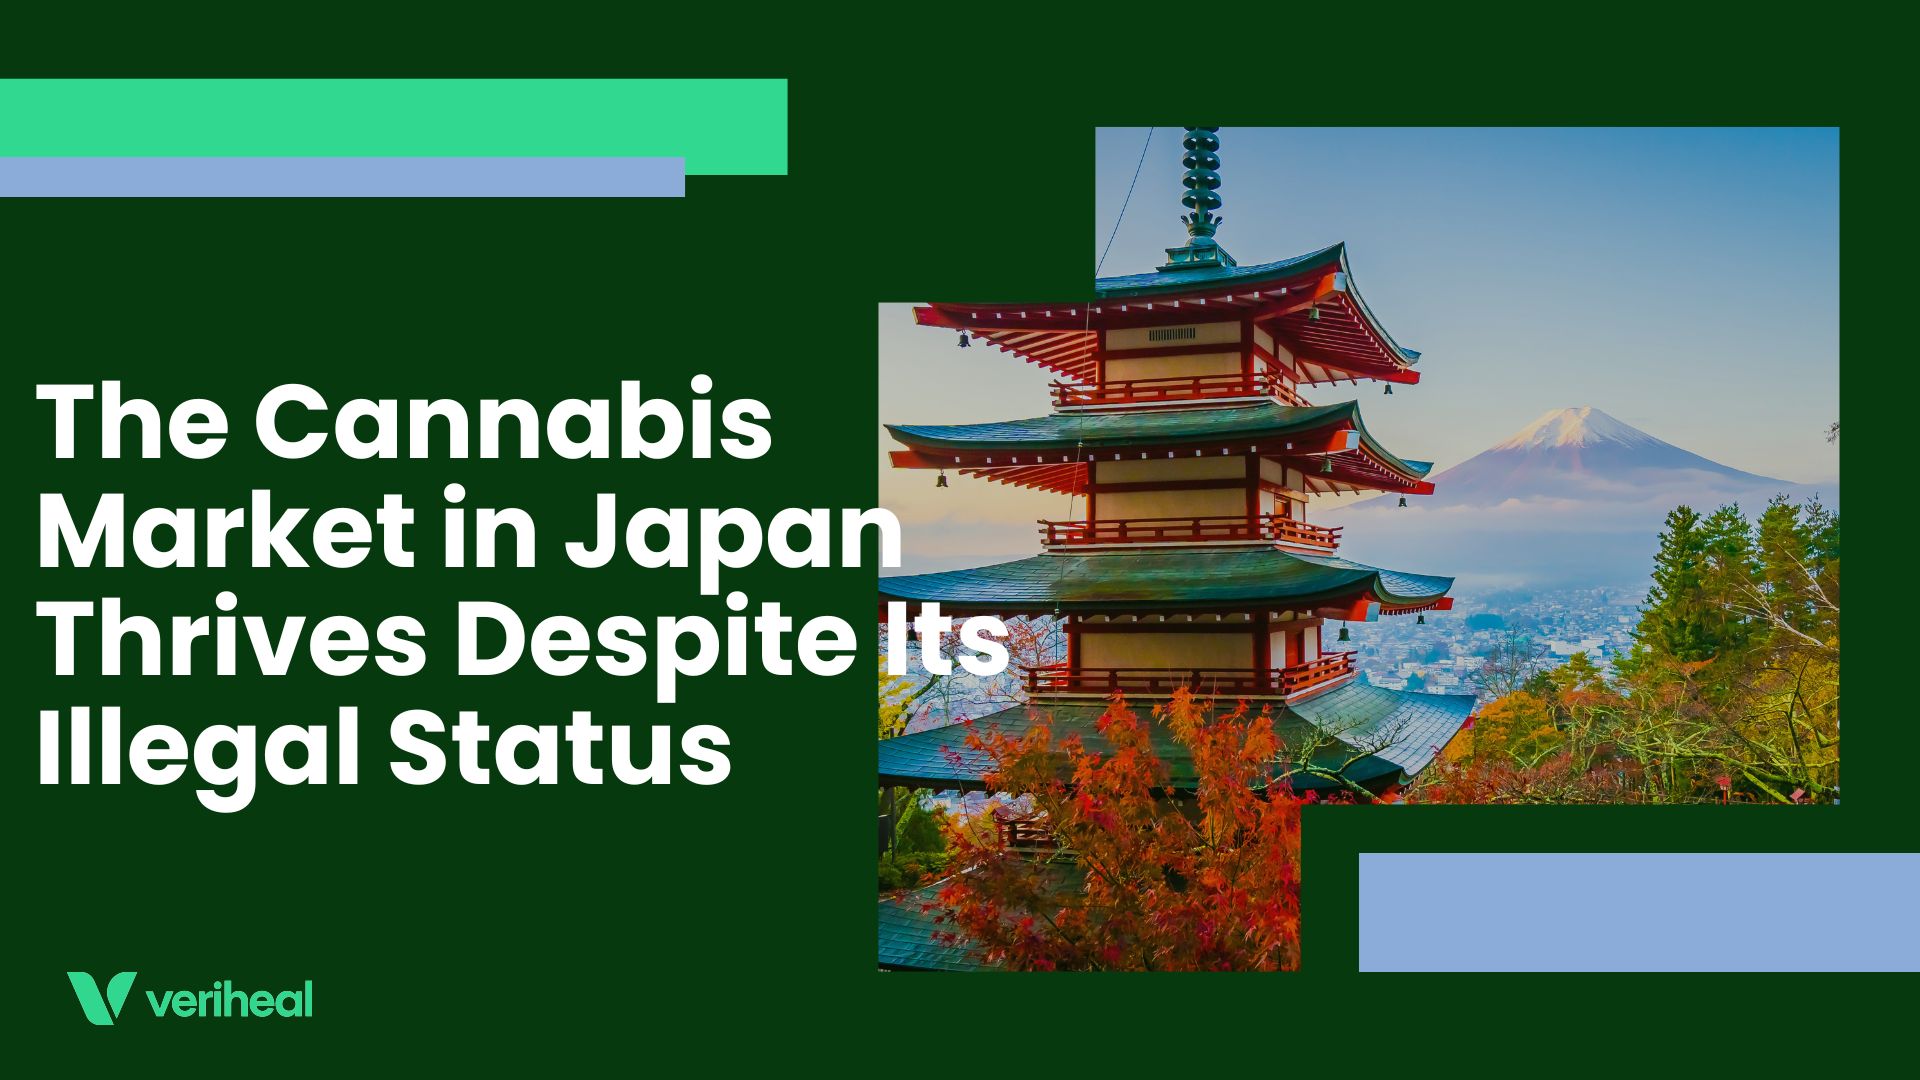 The Cannabis Market in Japan Thrives Despite Its Illegal Status